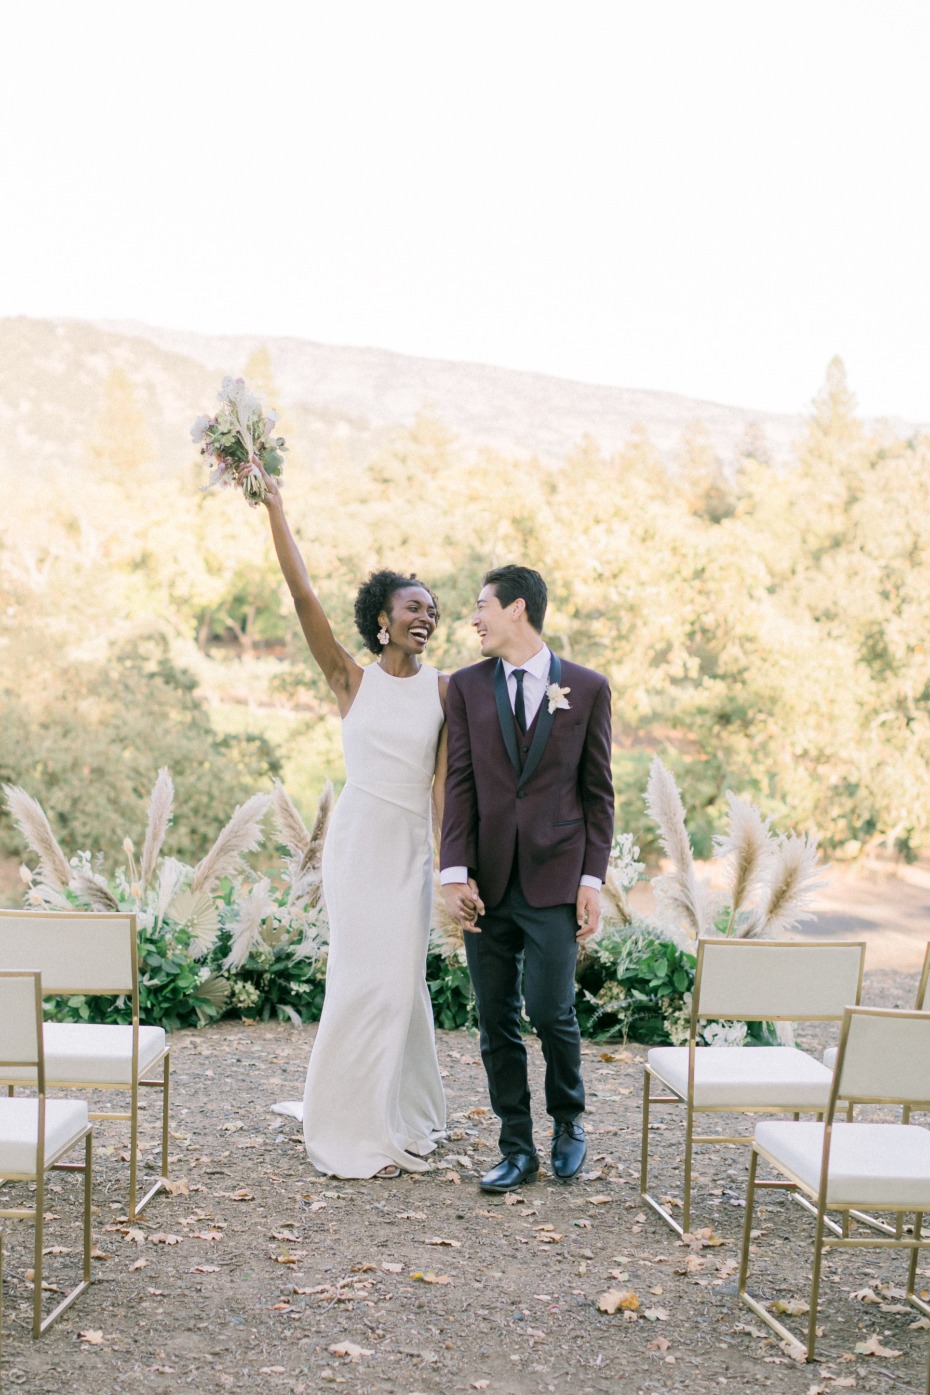 This California Wedding Venue Is Known For It's Outdoor Spaces and Perfectly Paired Menus